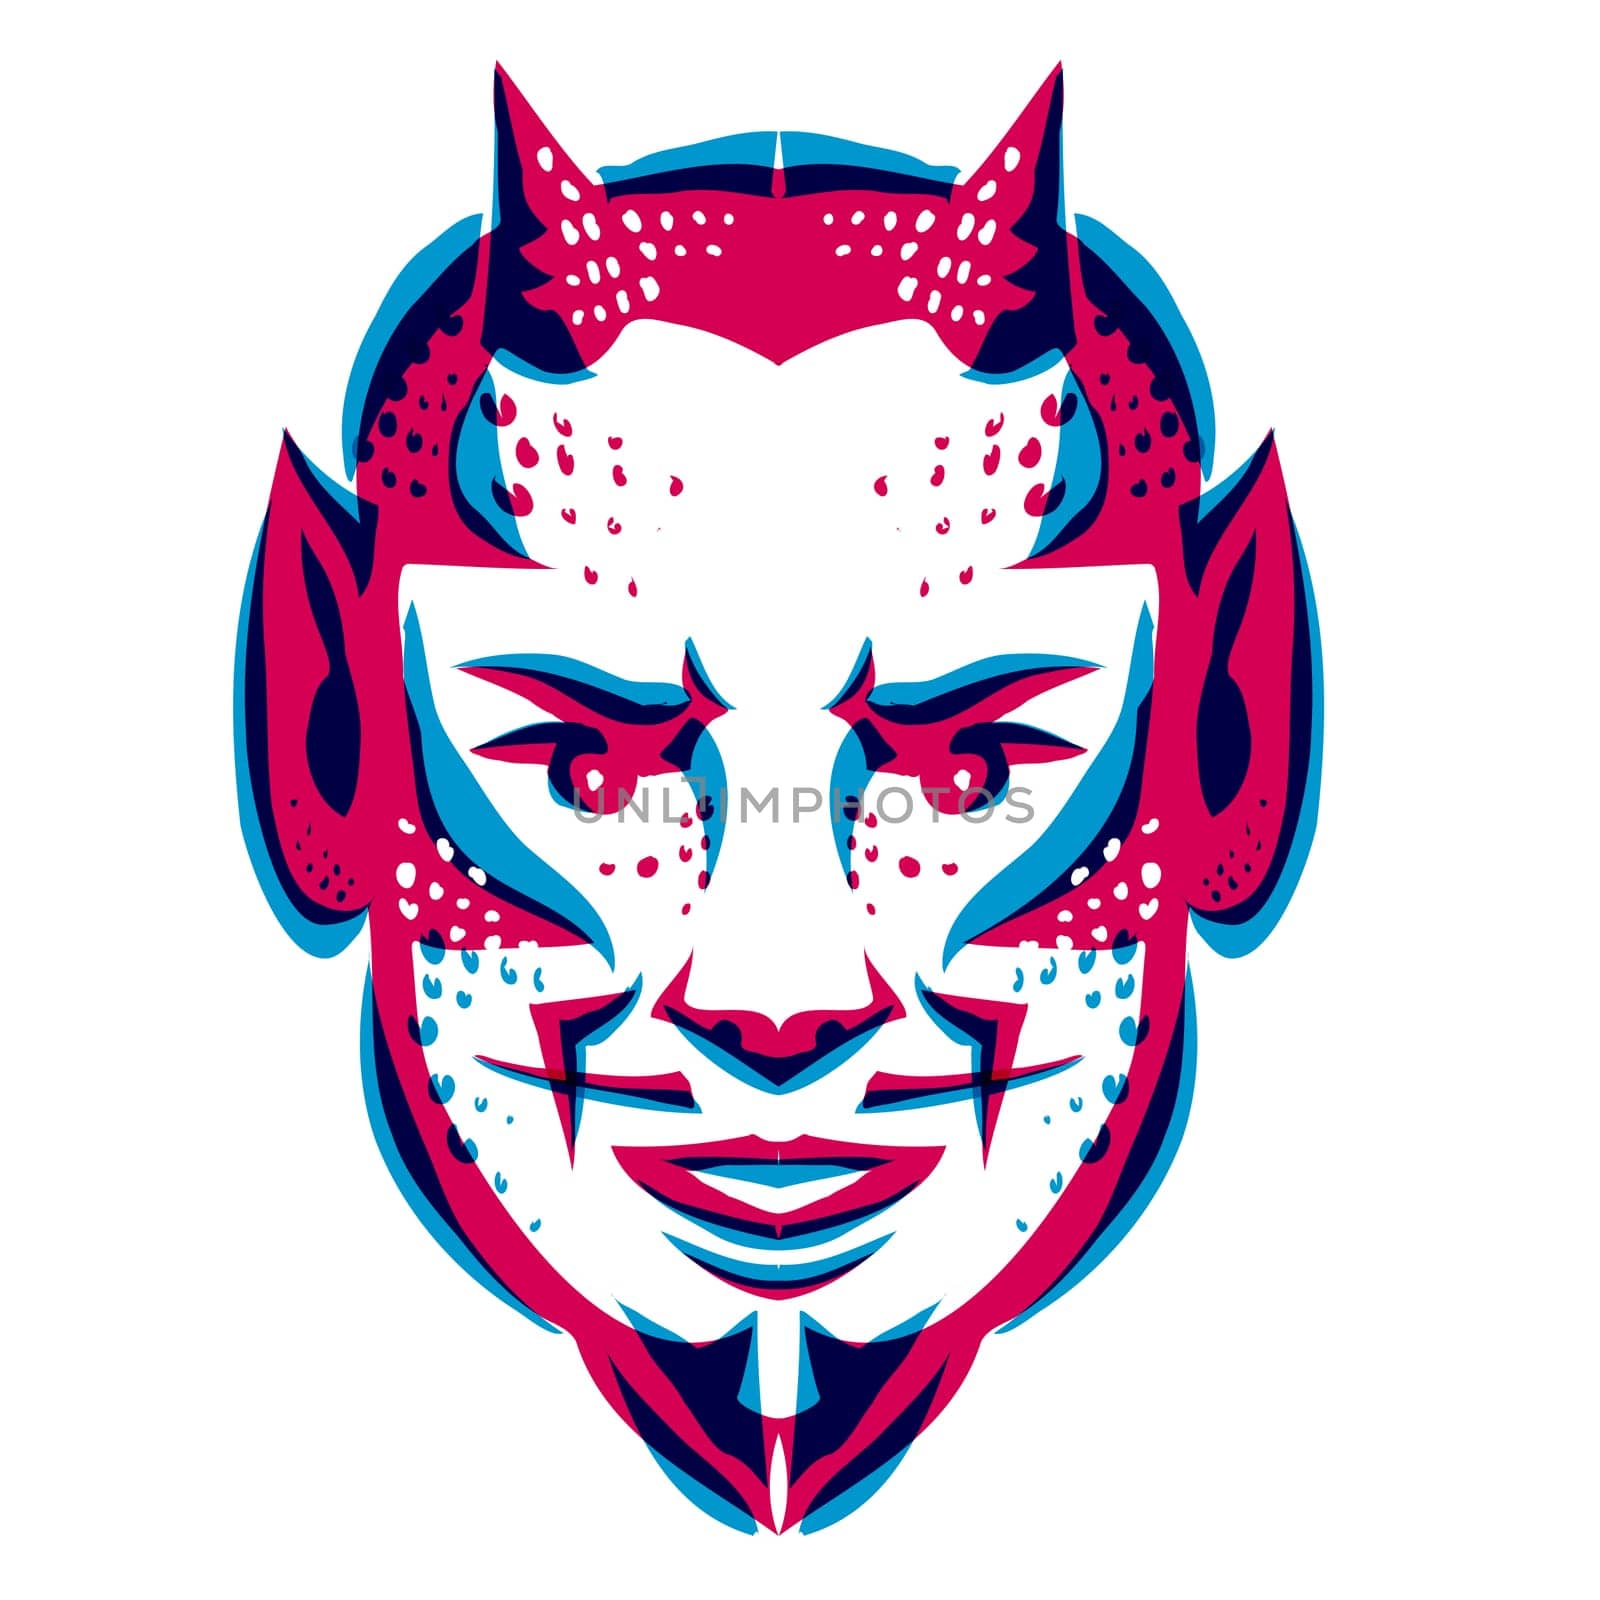 Risograph technique illustration of a head of a demon or devil viewed from front in retro riso effect digital screen printing style.
